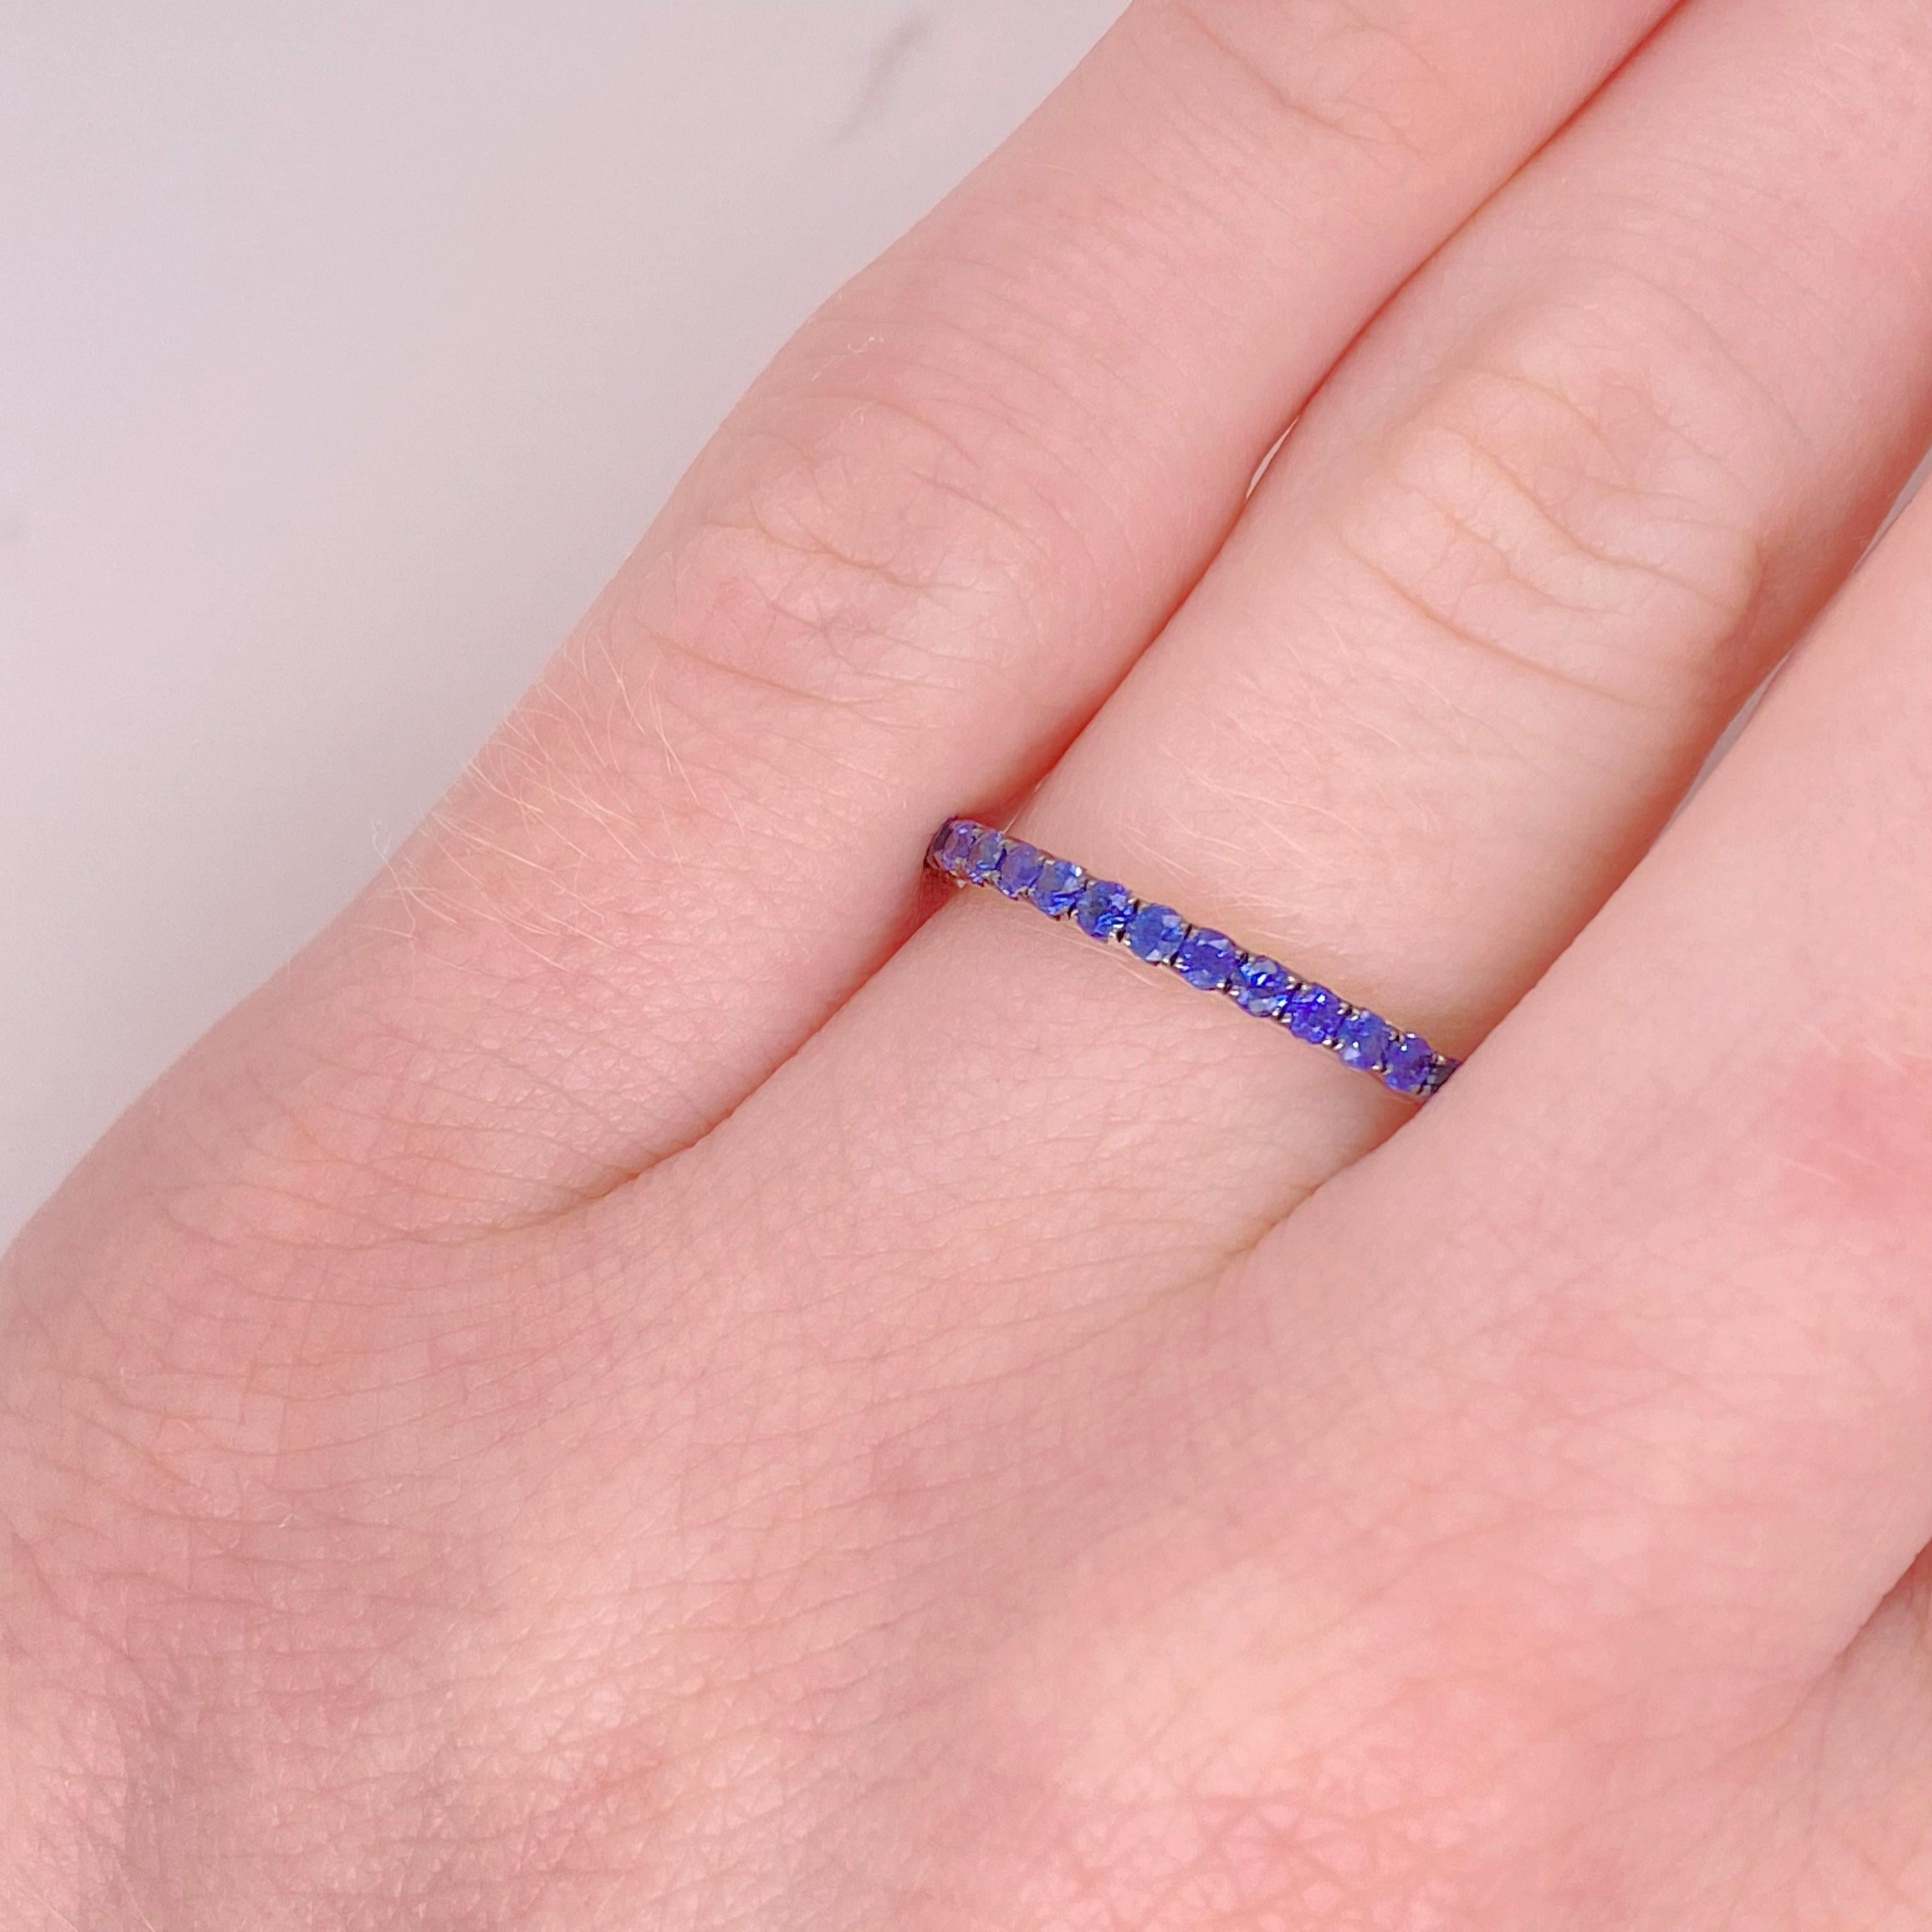 If you want a sapphire band and want a straight line of blue, this is the ring for you. The way the sapphires are set closely together, you see a line of blue and they are set securely in 18k white gold. We normally sell two of these bands together